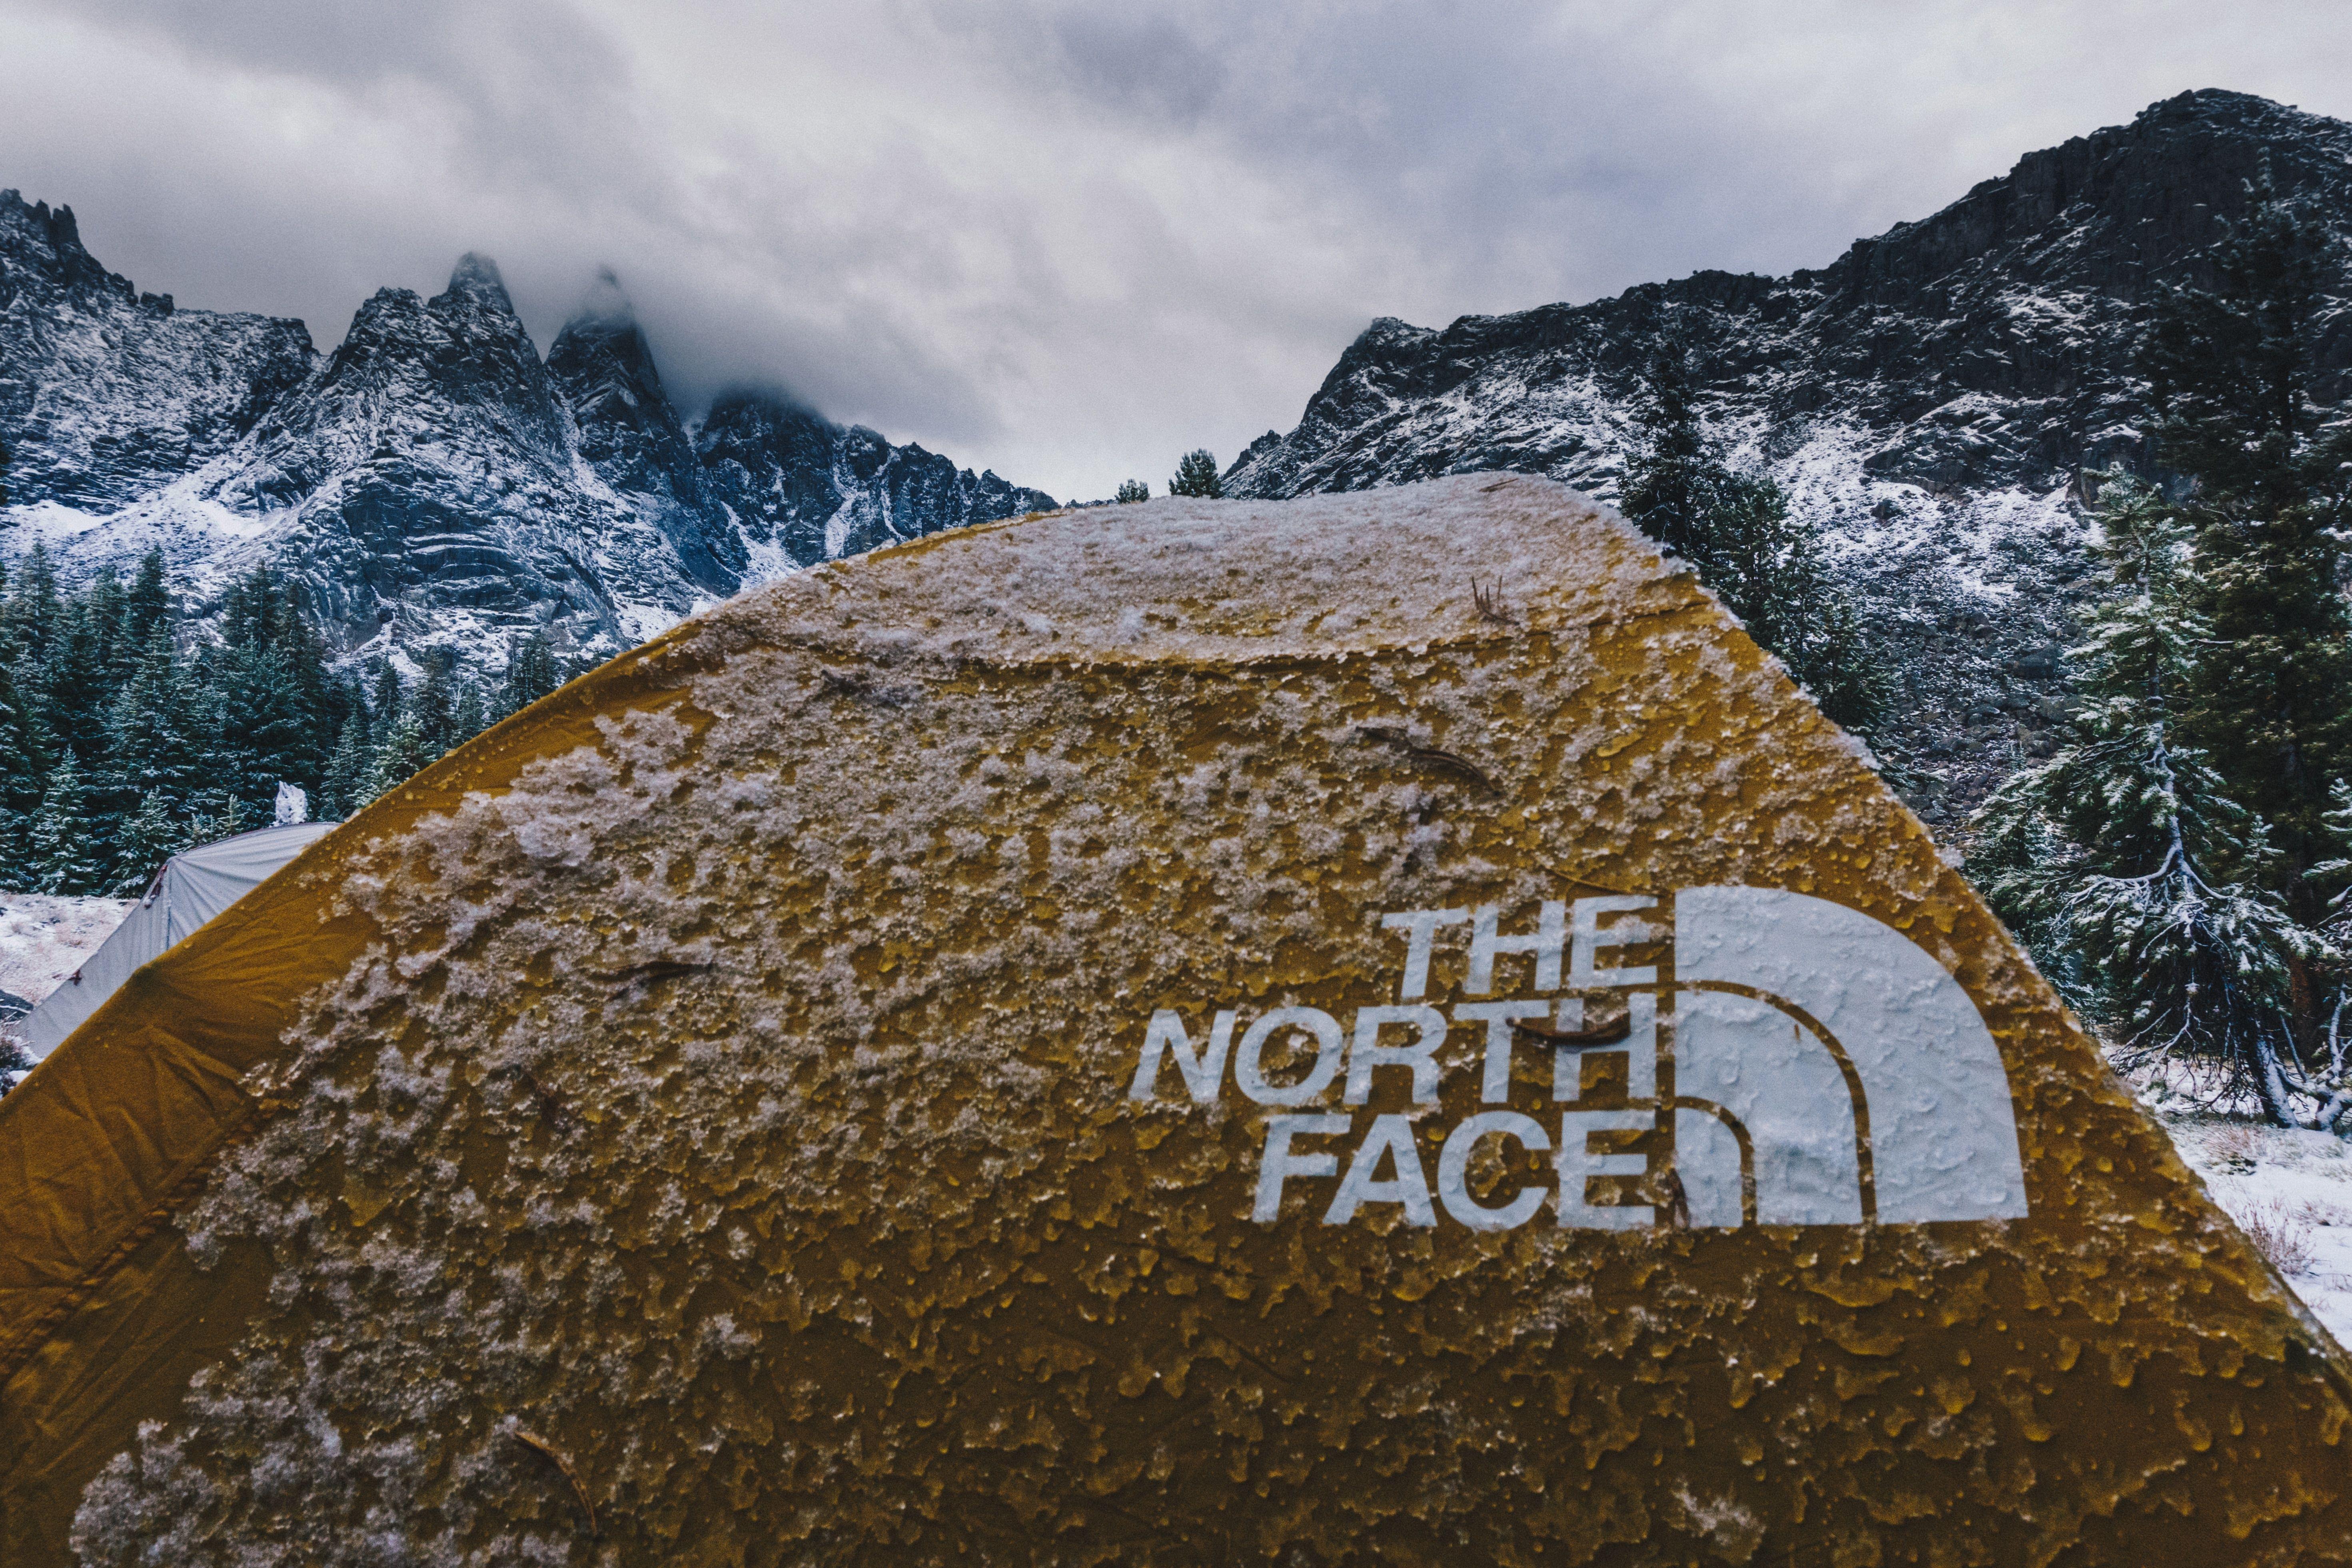 beige The North Face tent free image